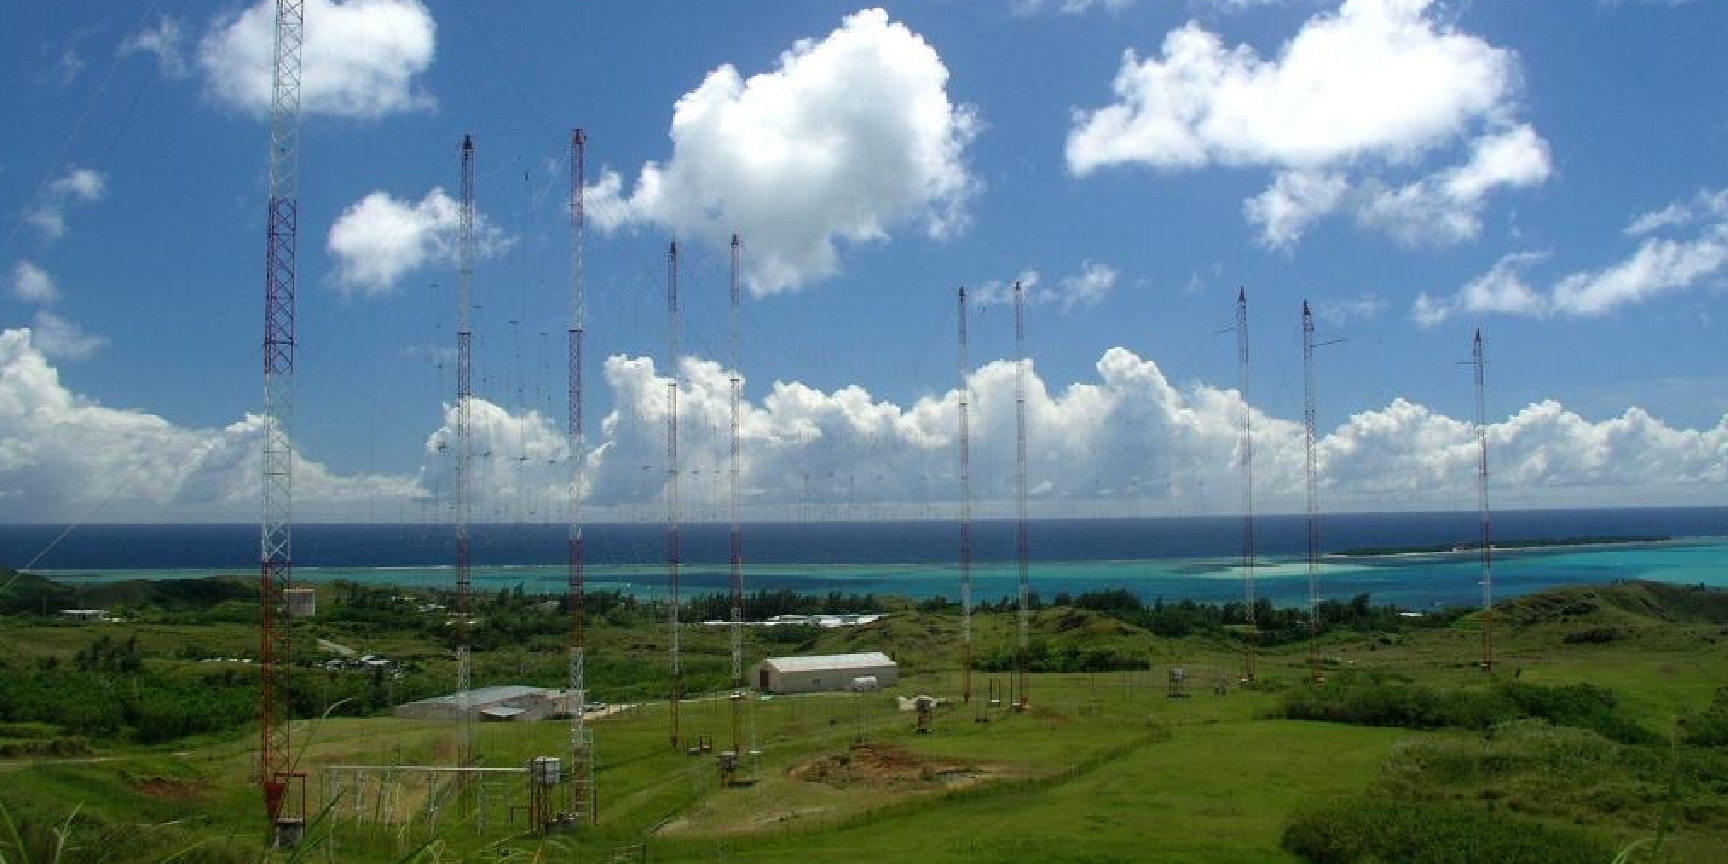 TWR's transmitter on the Pacific island of Guam